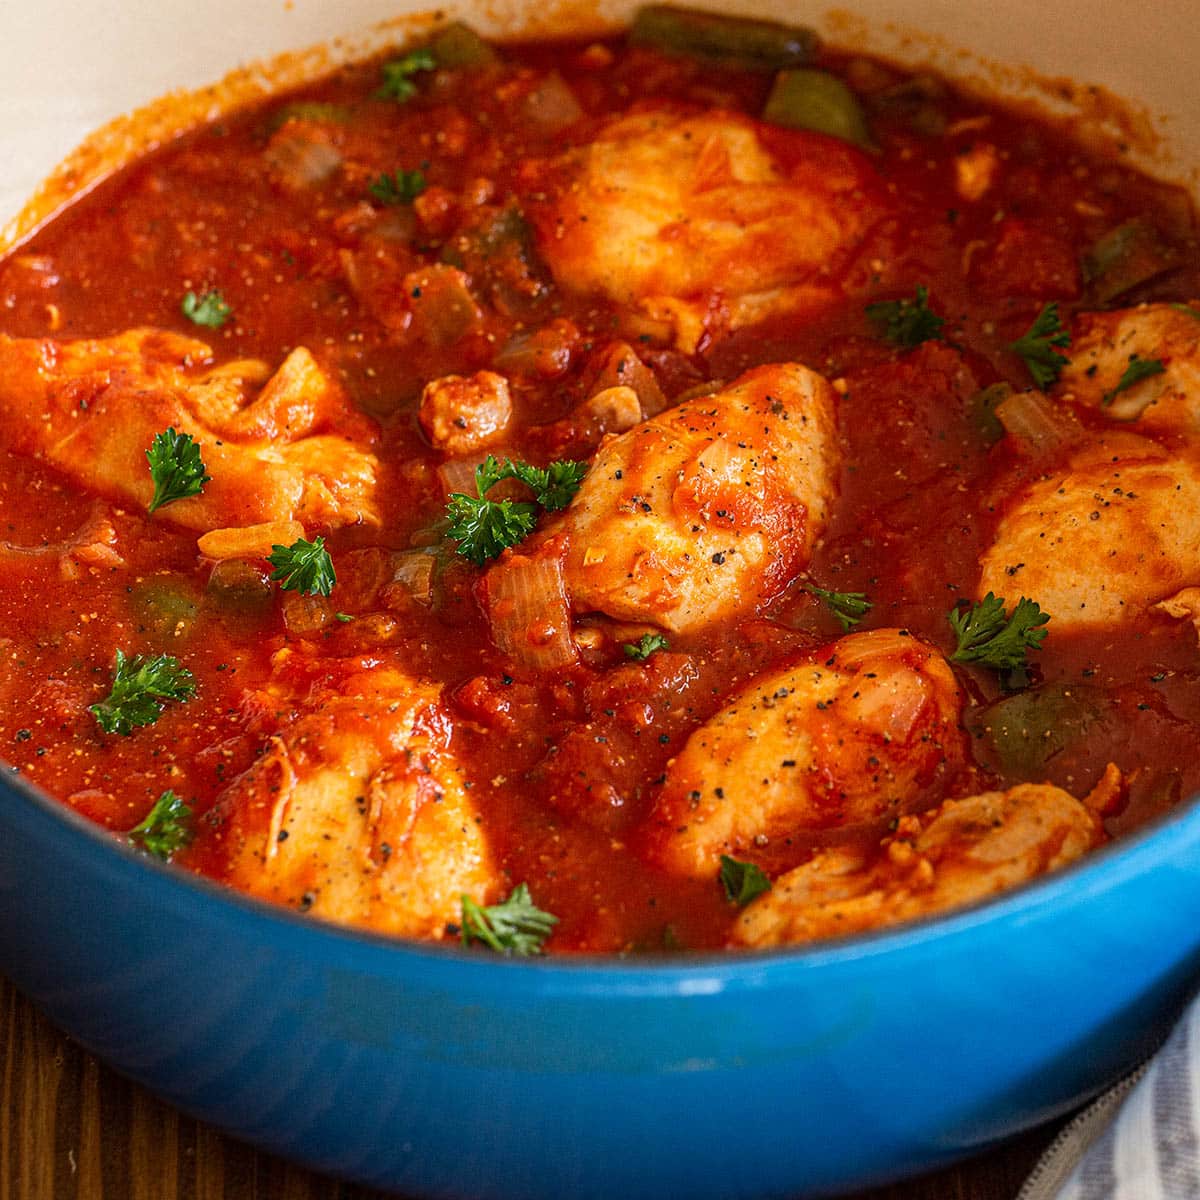 Blue Dutch oven with chicken thigh cacciatore in rich tomato sauce.